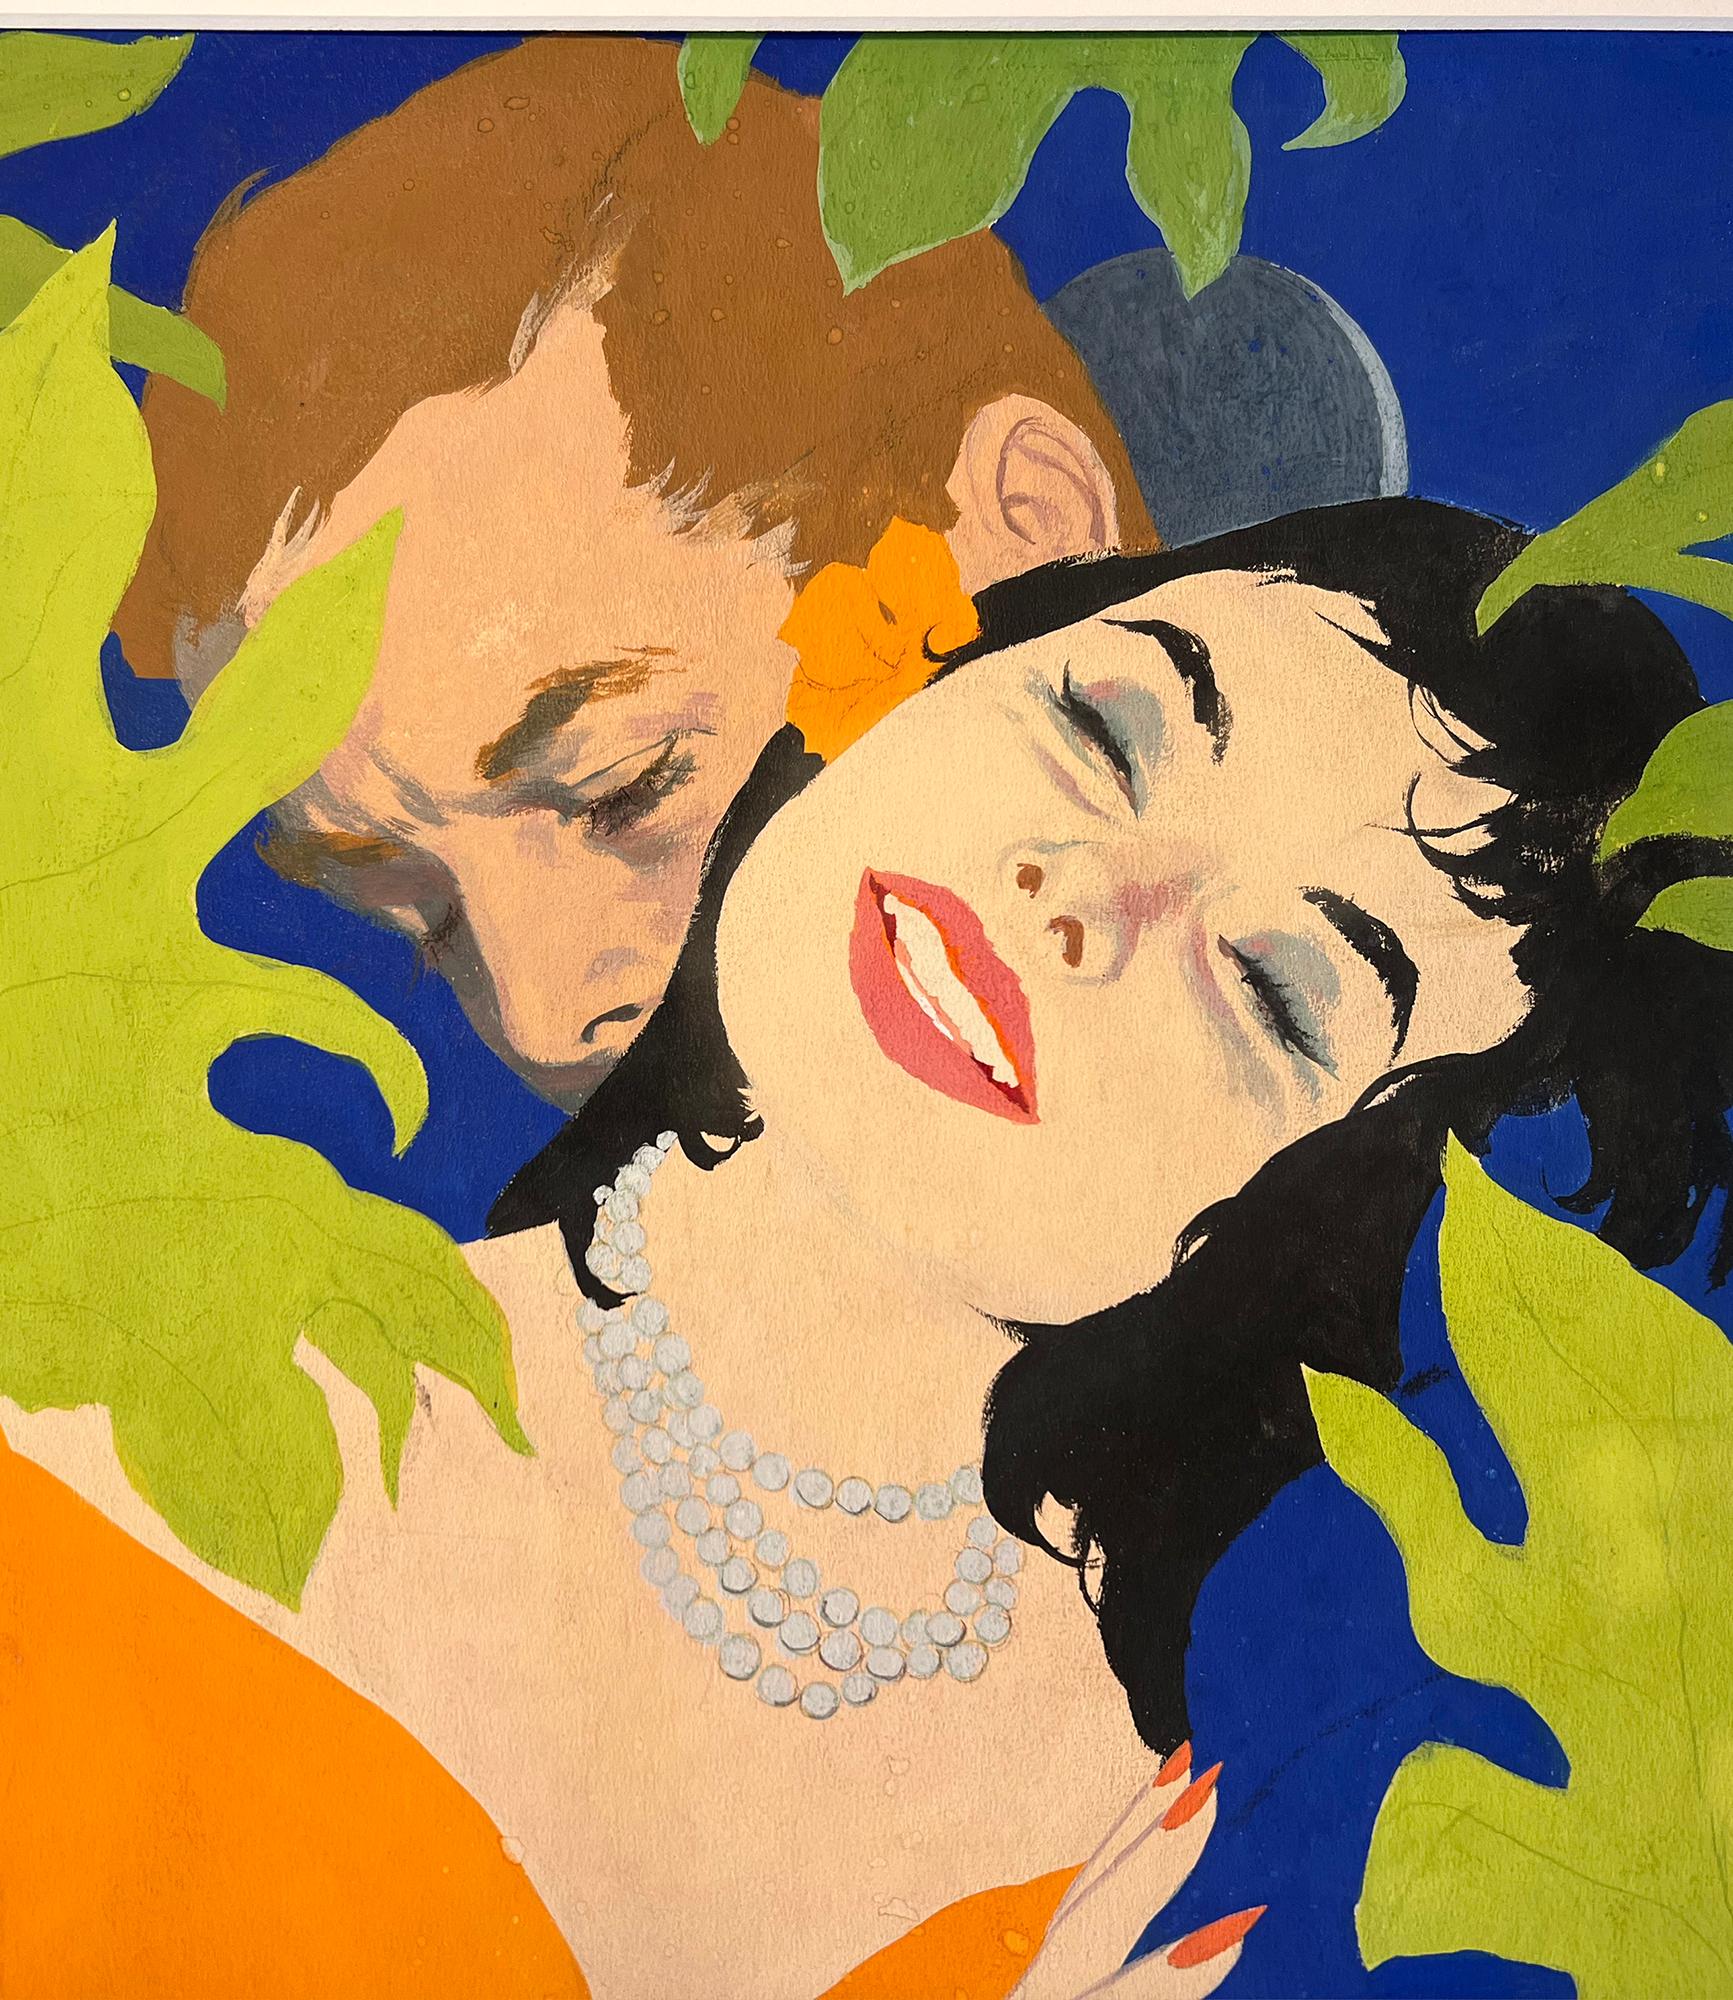 Love Story Couple in Romantic Bliss Illustration - Mid Century  - Painting by Joe Bowler